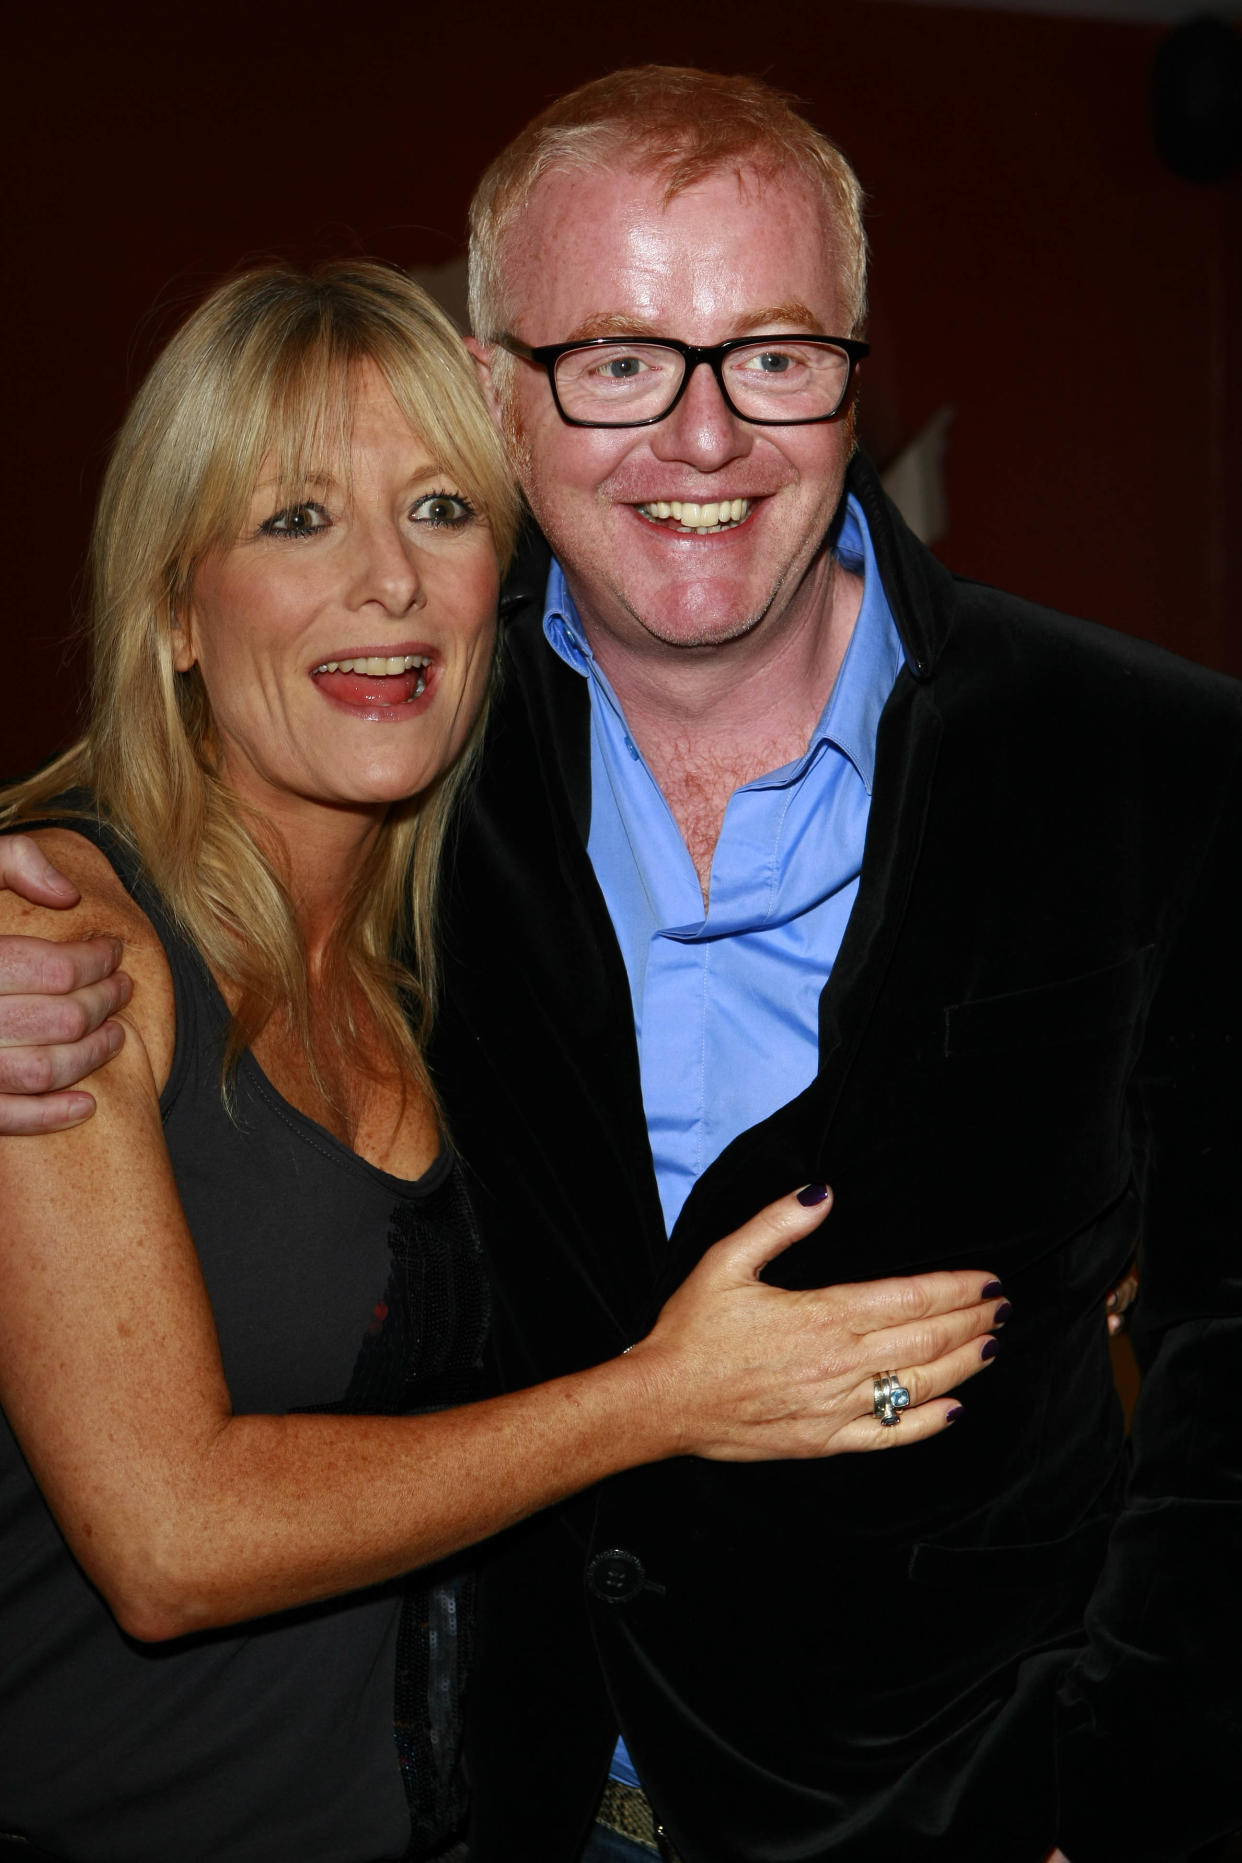 LONDON, ENGLAND - OCTOBER 1: (EMBARGOED FOR PUBLICATION IN UK TABLOID NEWSPAPERS UNTIL 48 HOURS AFTER CREATE DATE AND TIME) Gaby Roslin and Chris Evans attend Chris Evans book launch party, held at the Groucho Club, Soho, on October 1 2009 in London, England.  (Photo by Dave M. Benett/Getty Images)